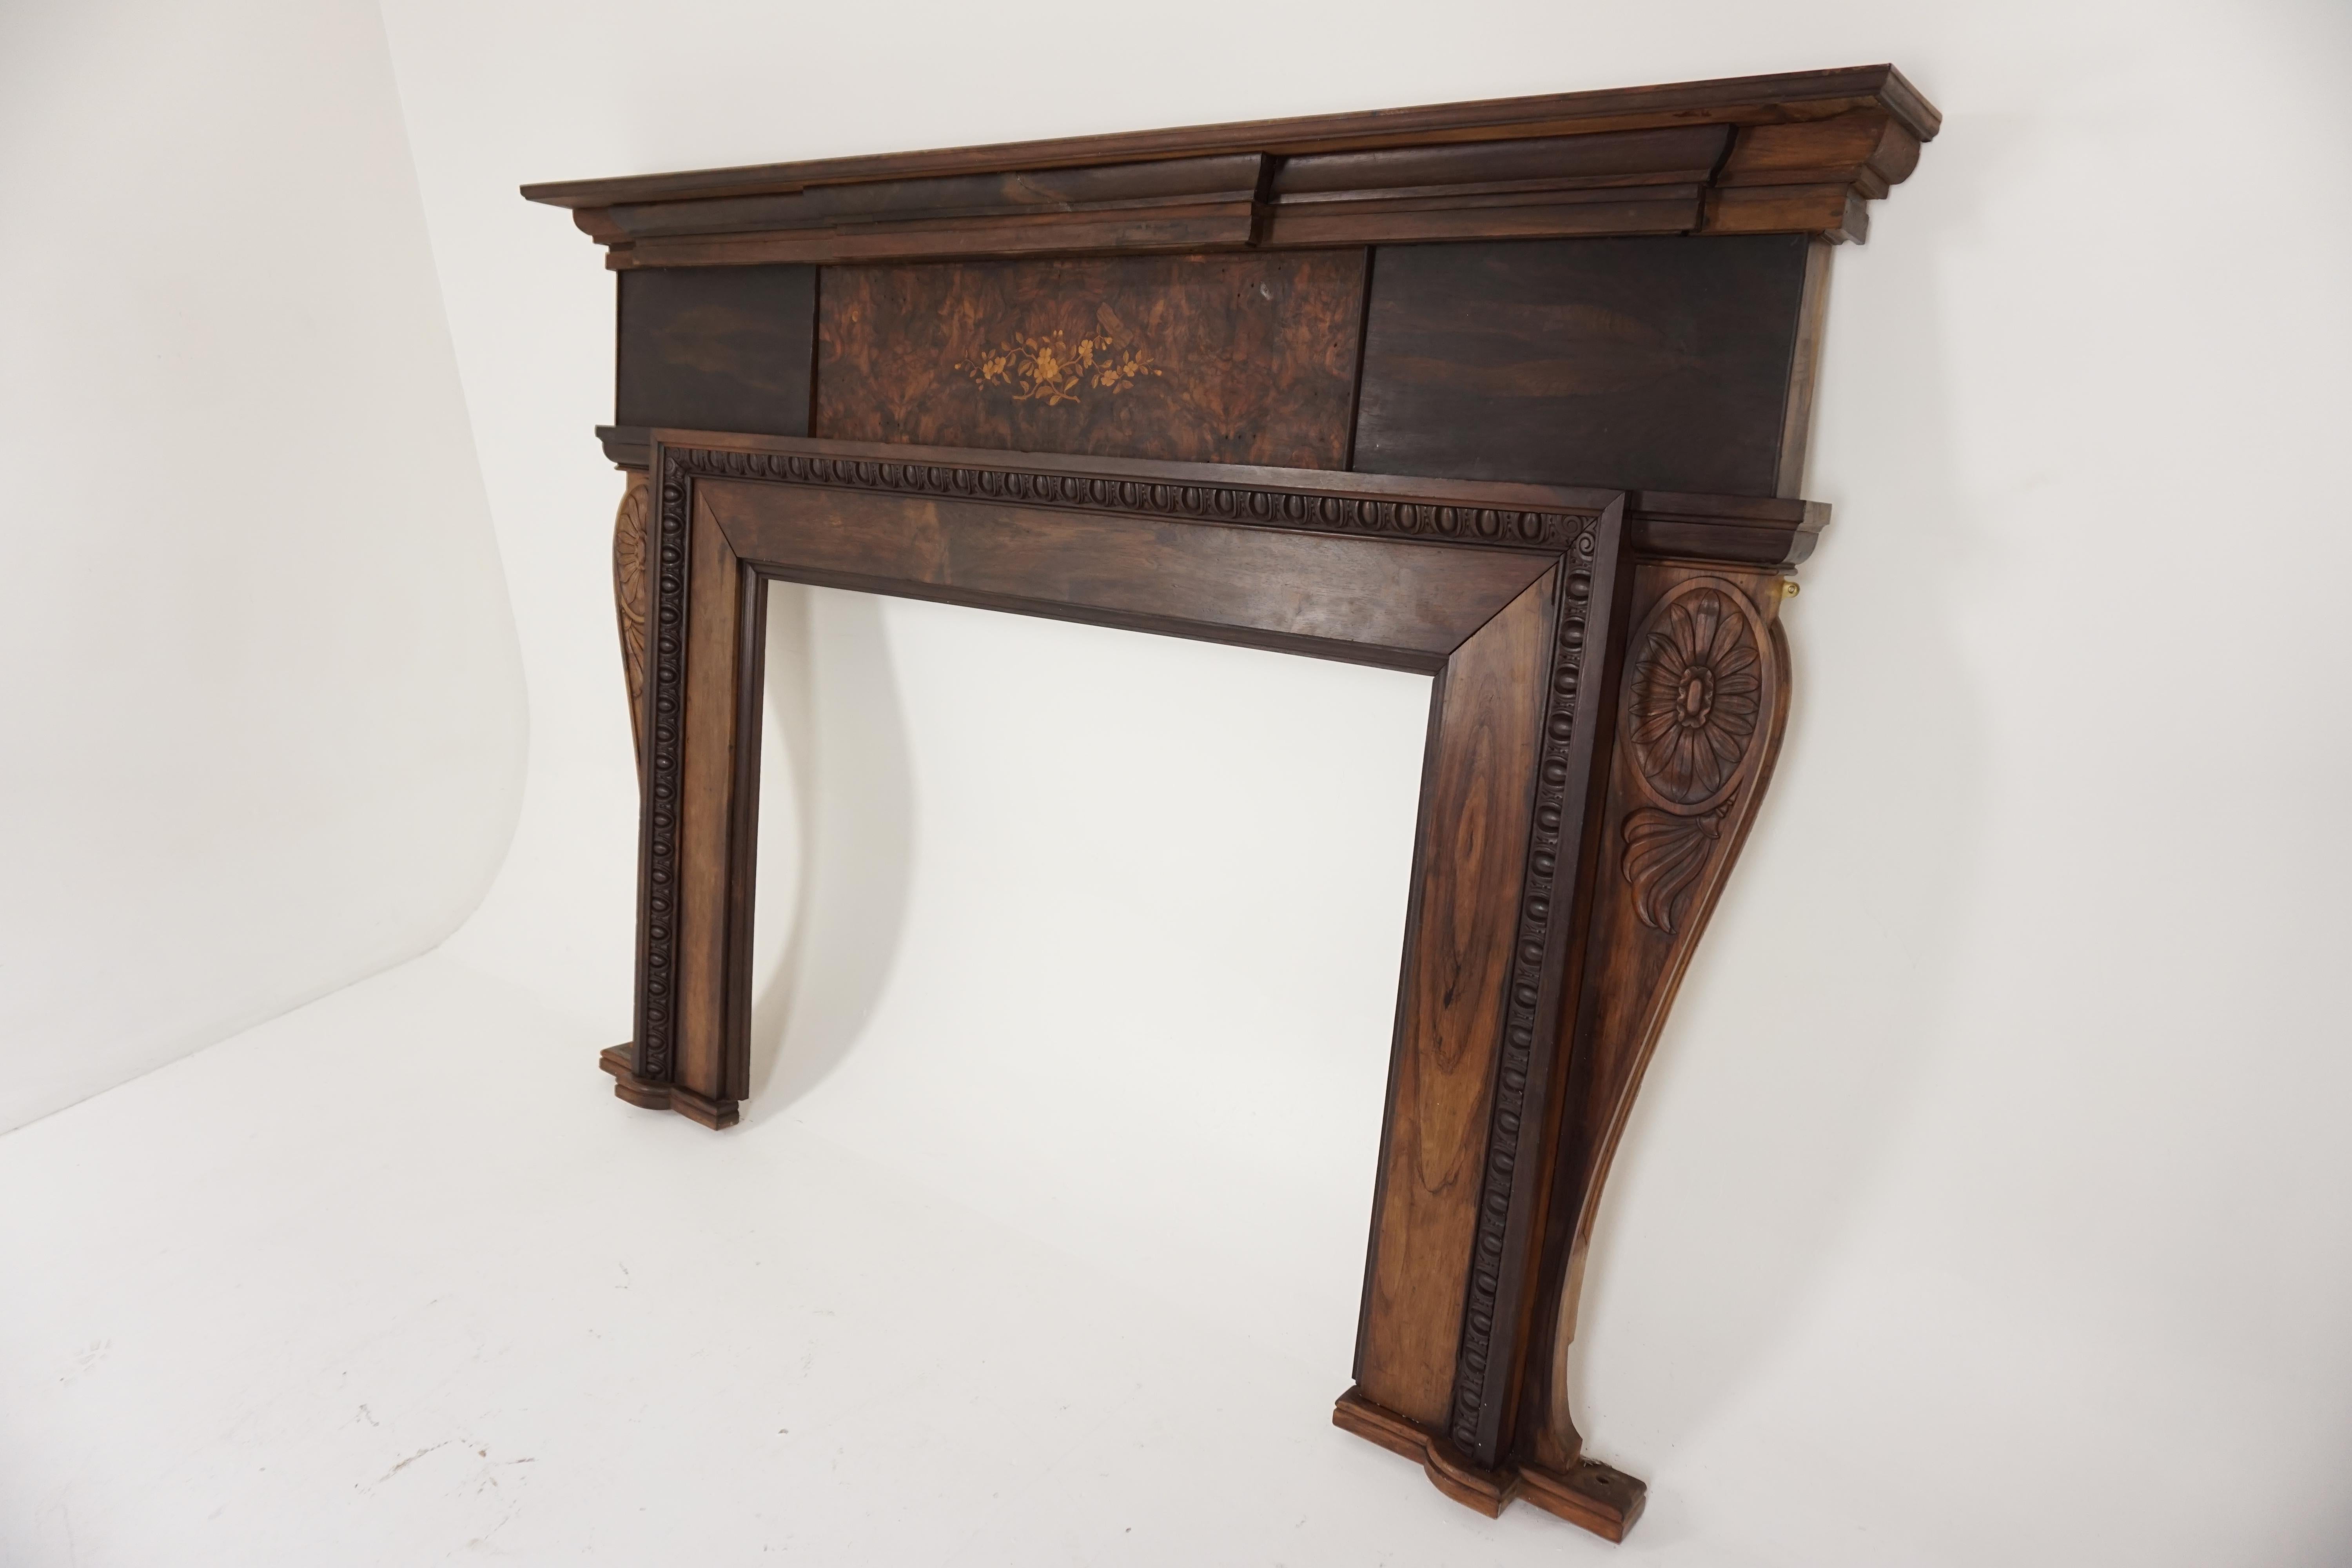 Antique fireplace surround, Victorian, walnut inlaid mantle, Scotland 1880, B1830

Scotland, 1880
Walnut veneer
Original finish
Mantle shelf on top
Paneled frieze with inlaid flowers
Shaped upright with carving to the top
Carved egg and dart